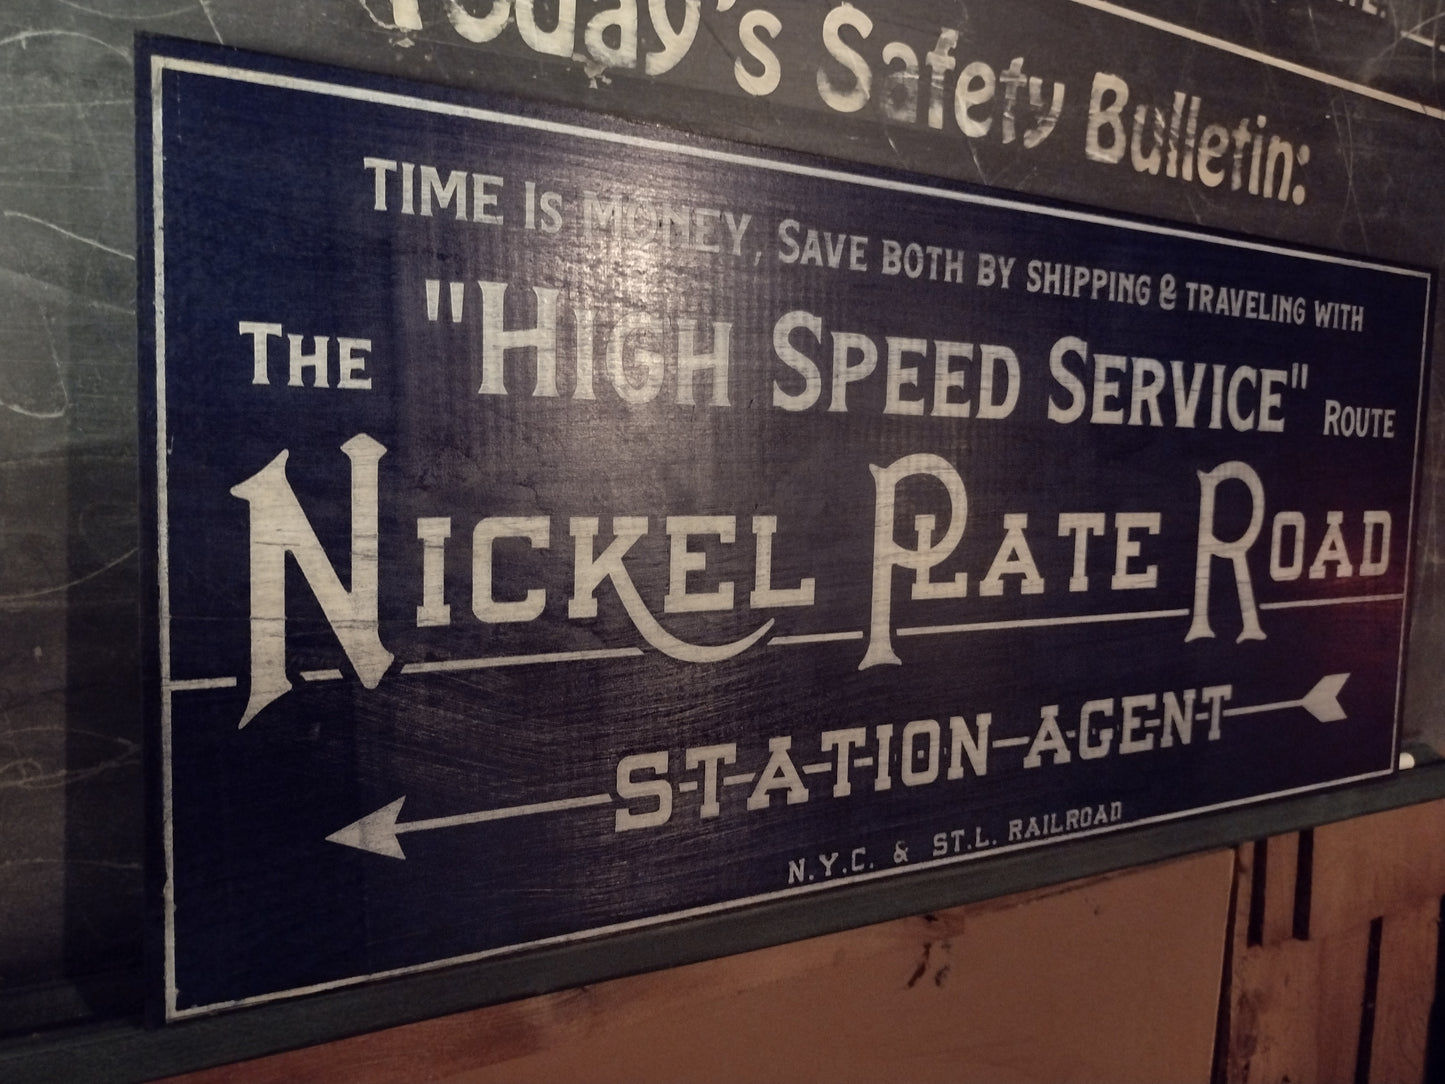 Nickel Plate Road Station Agent Sign Hand painted on Hardwood